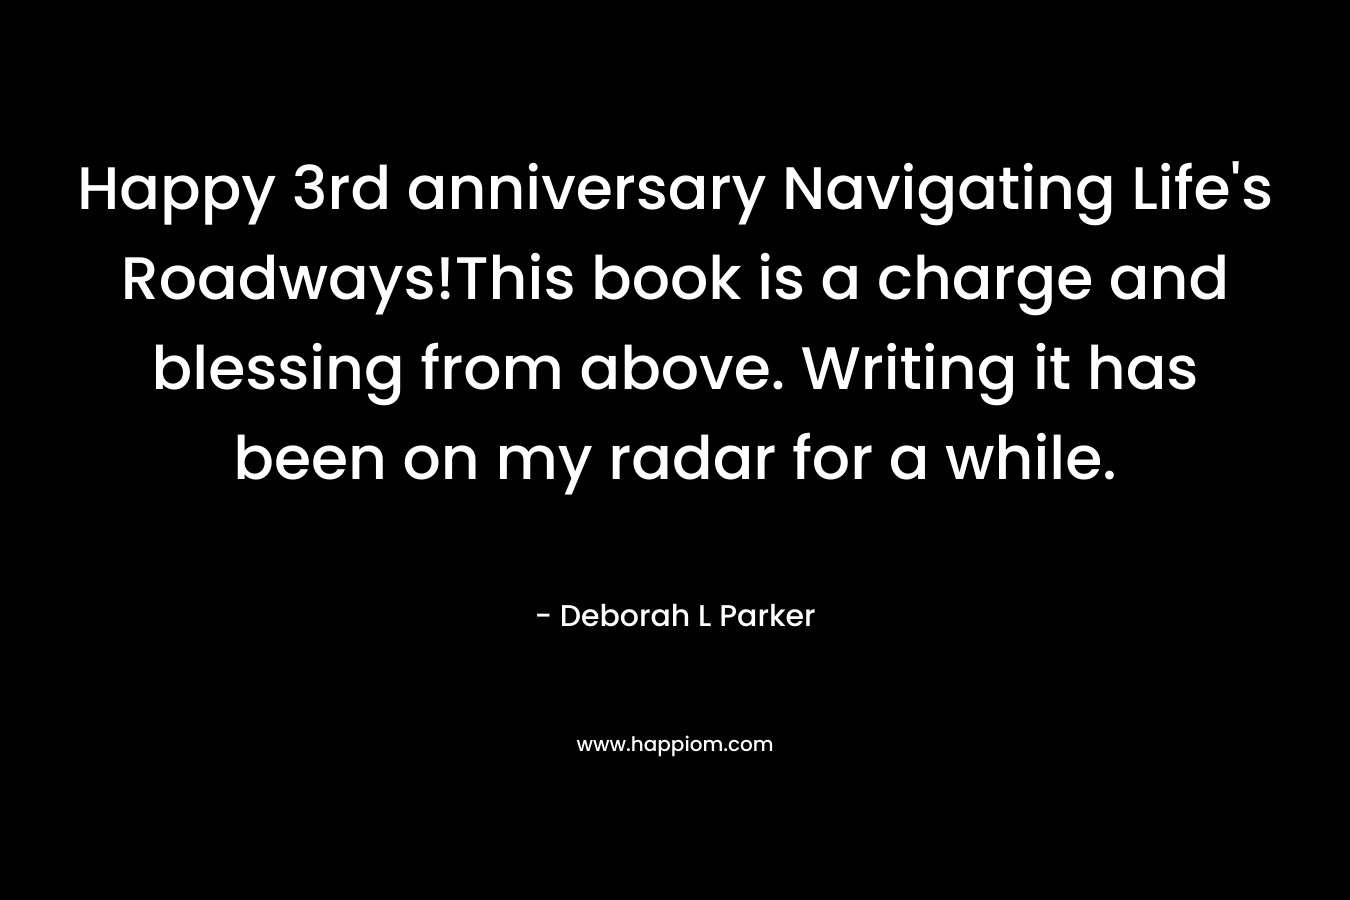 Happy 3rd anniversary Navigating Life's Roadways!This book is a charge and blessing from above. Writing it has been on my radar for a while.